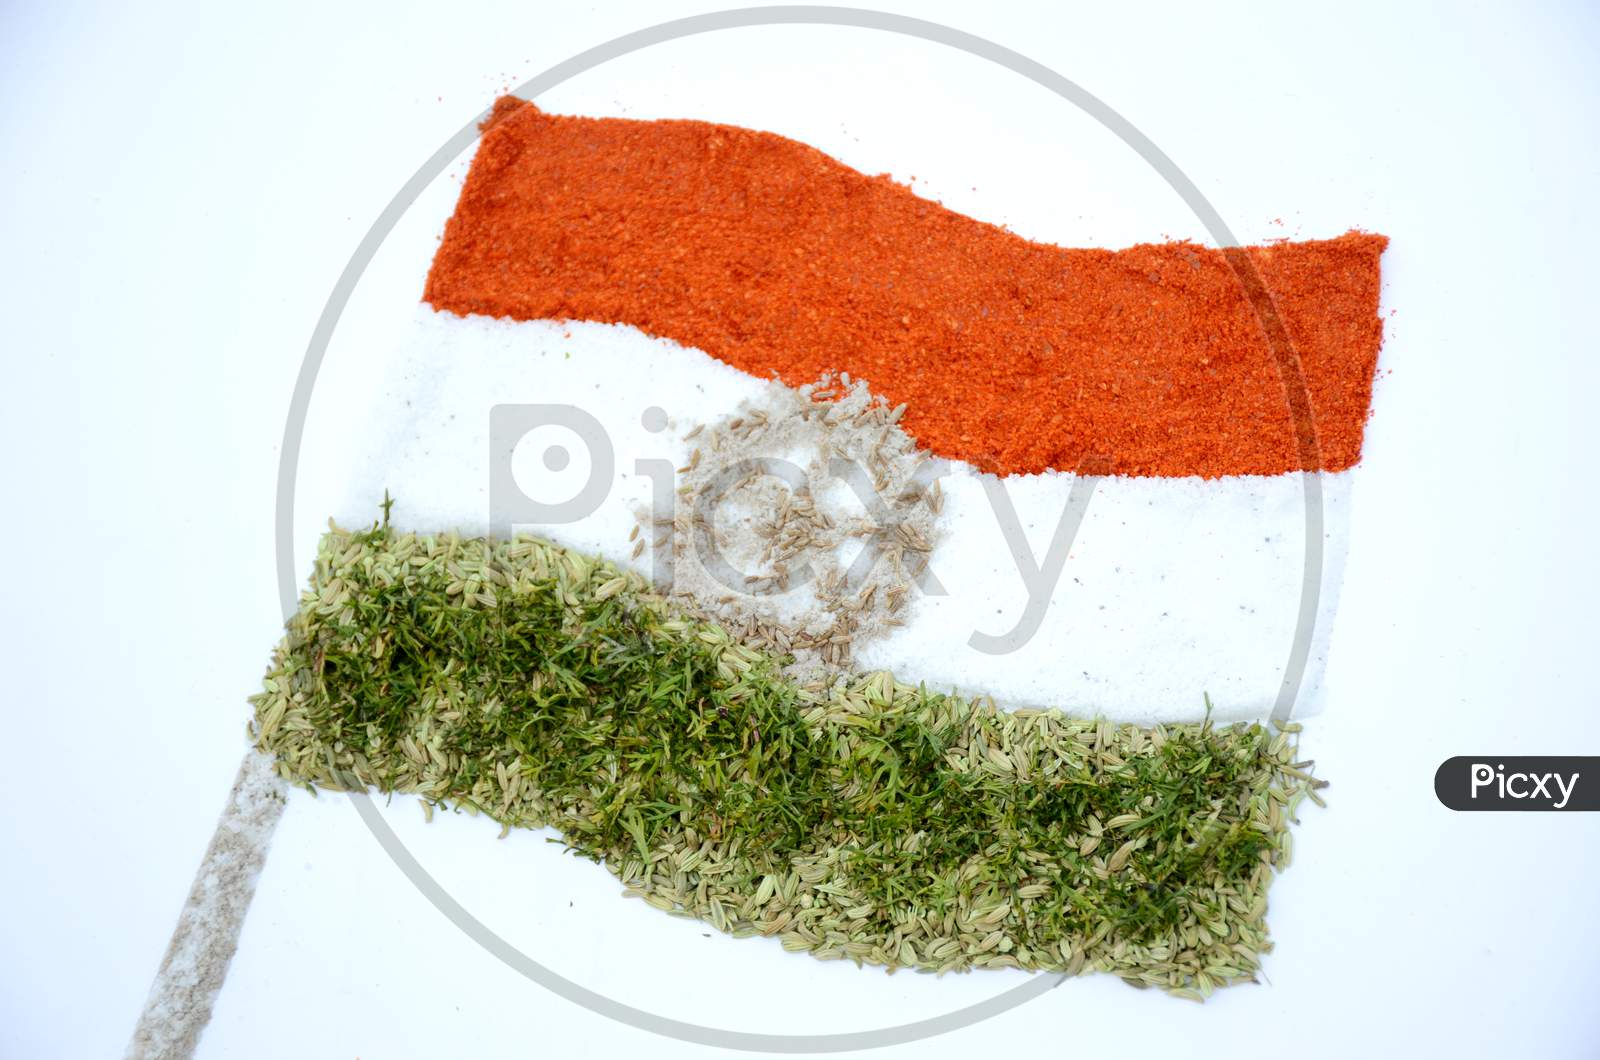 the indian flag from red chilly,white salt,and green anise in the memorial day or veteran's day